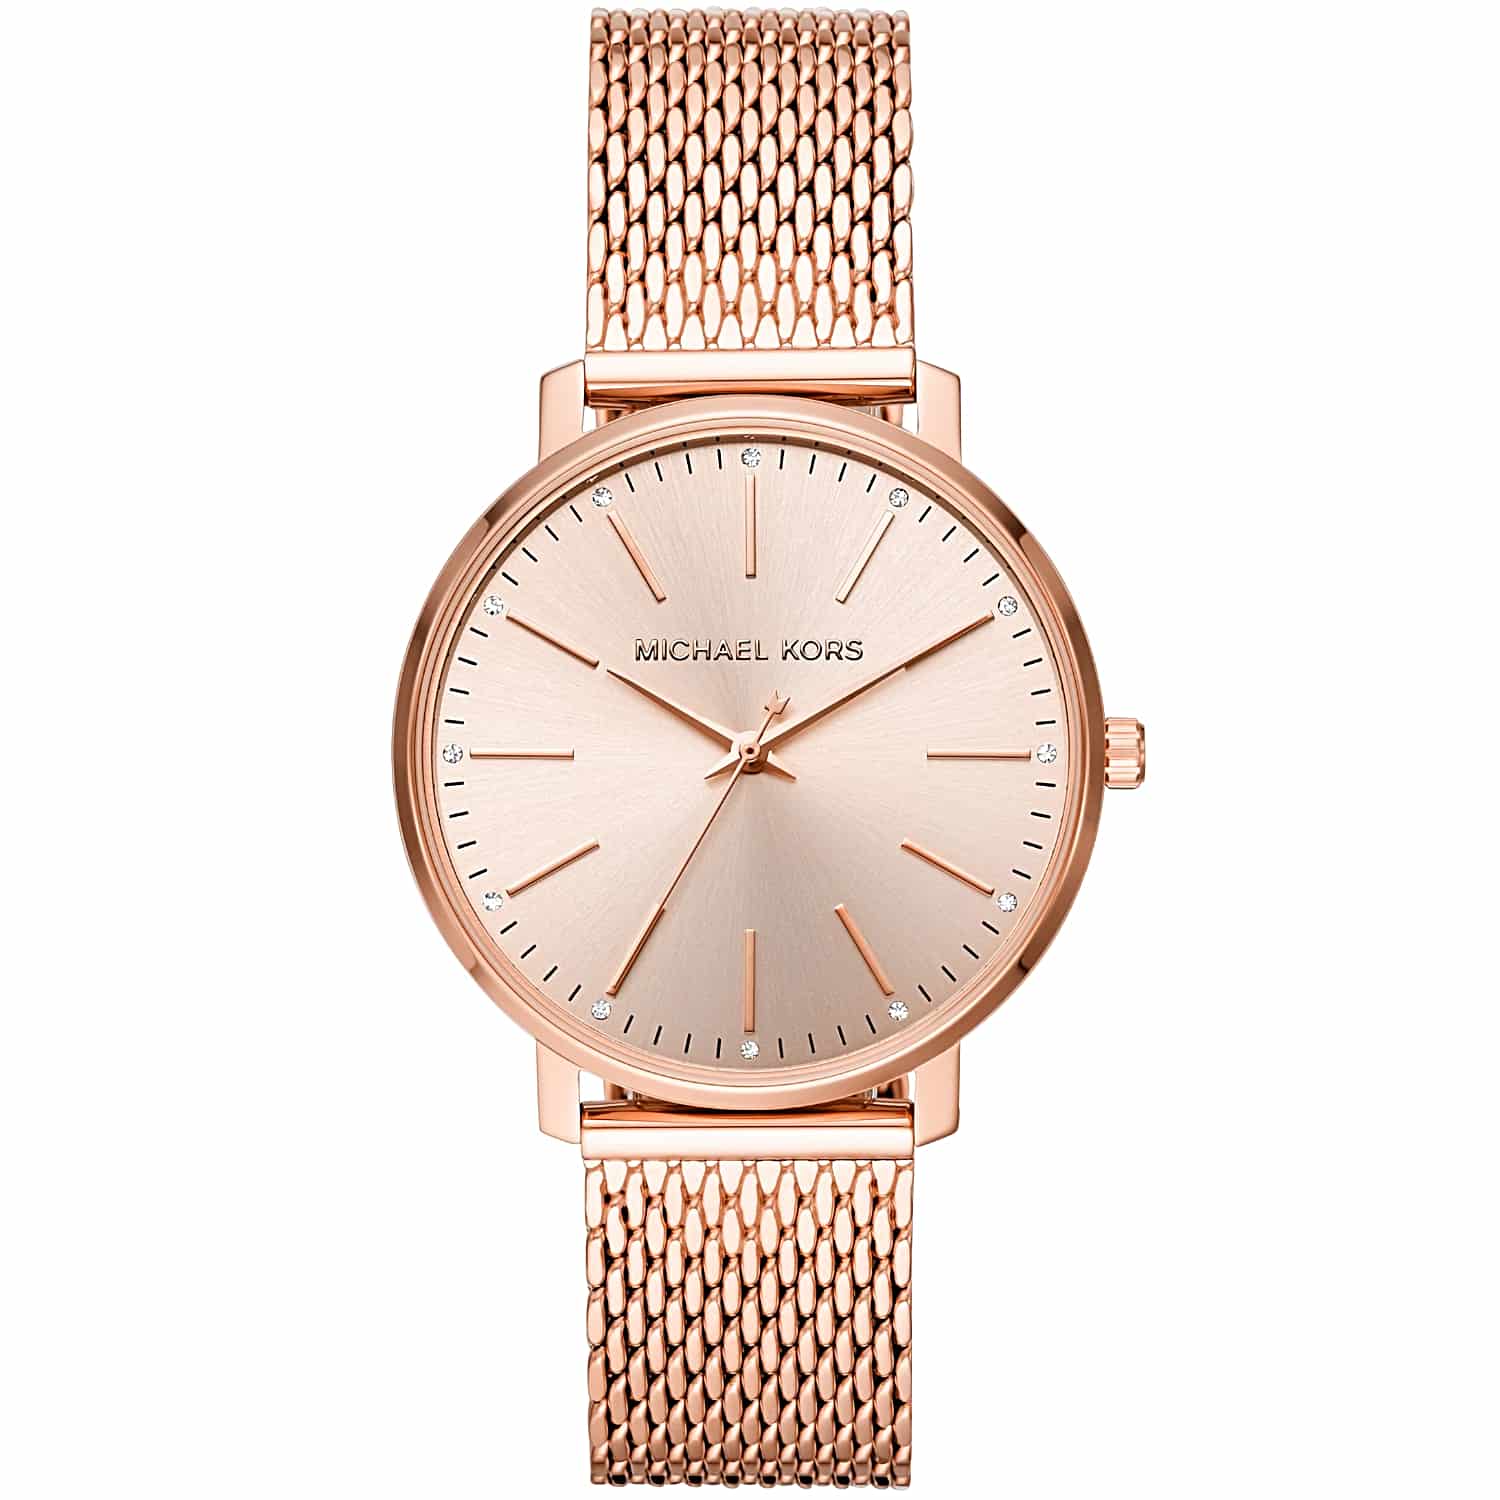 MK4340 Michael Kors Portia Watch. With a minimalist rose gold-tone dial, rounded rose gold-tone case and mesh bracelet, the ladies Michael Kors Portia Watch is classically chicOxipay is simply the easier way to pay - use Oxipay and well spread your pa @ch